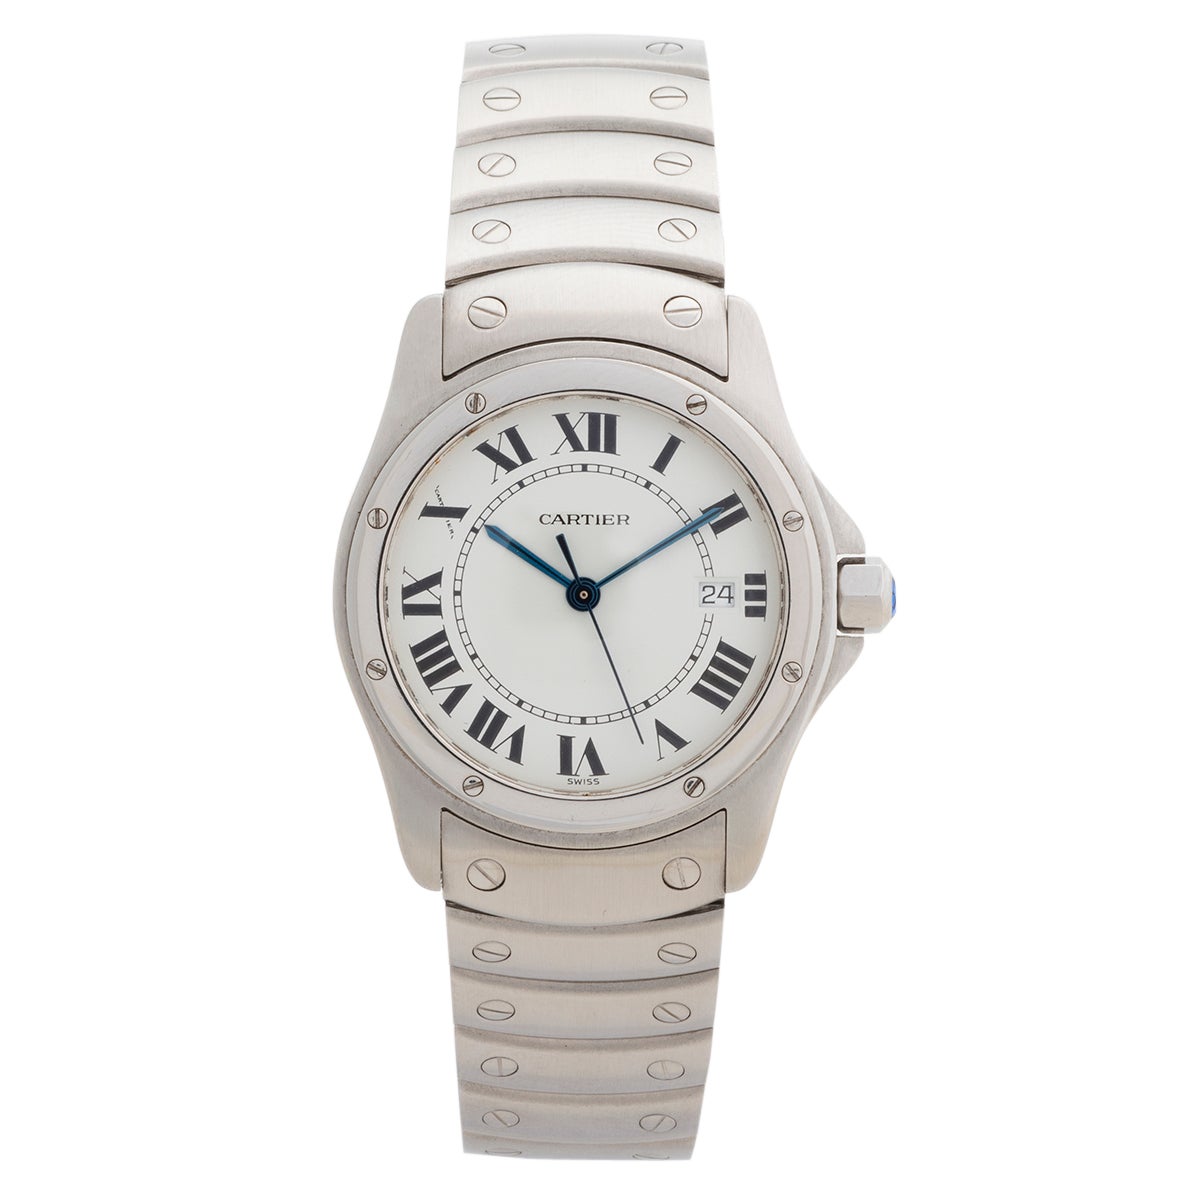 Classic Cartier Santos Ronde Ref 1561 'Discontinued', Outstanding Condition